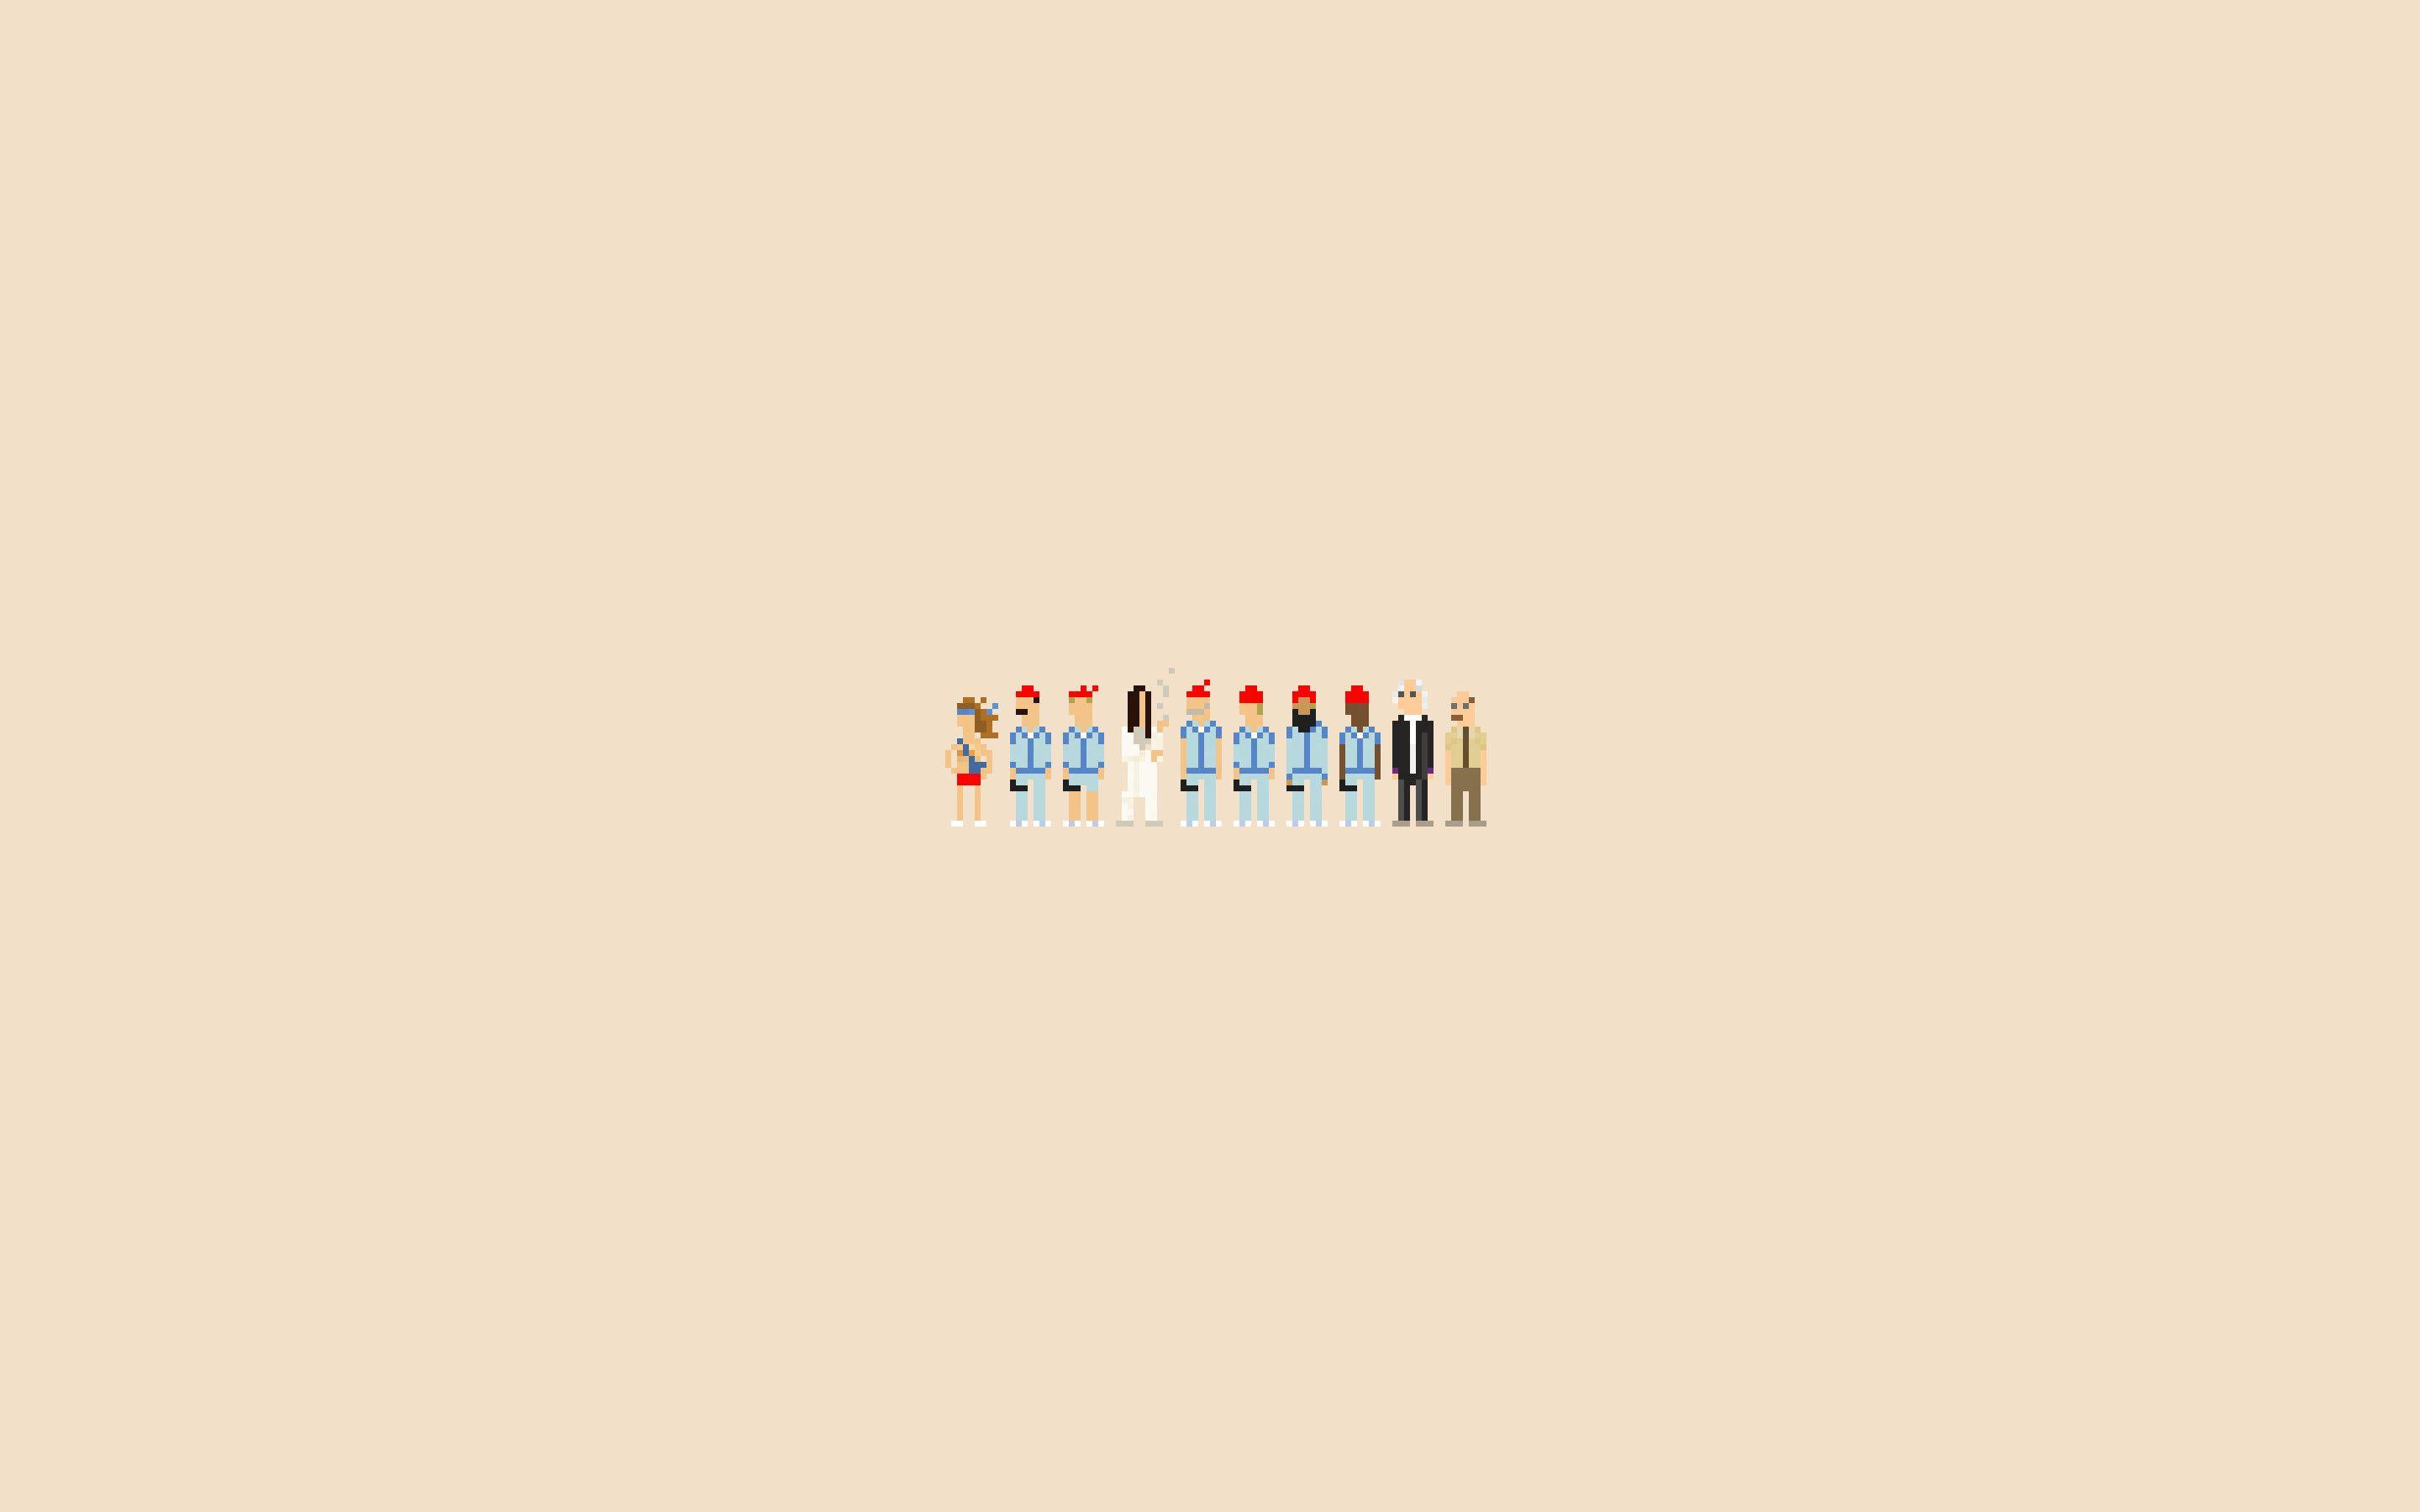 A group of people standing in front - Minimalist